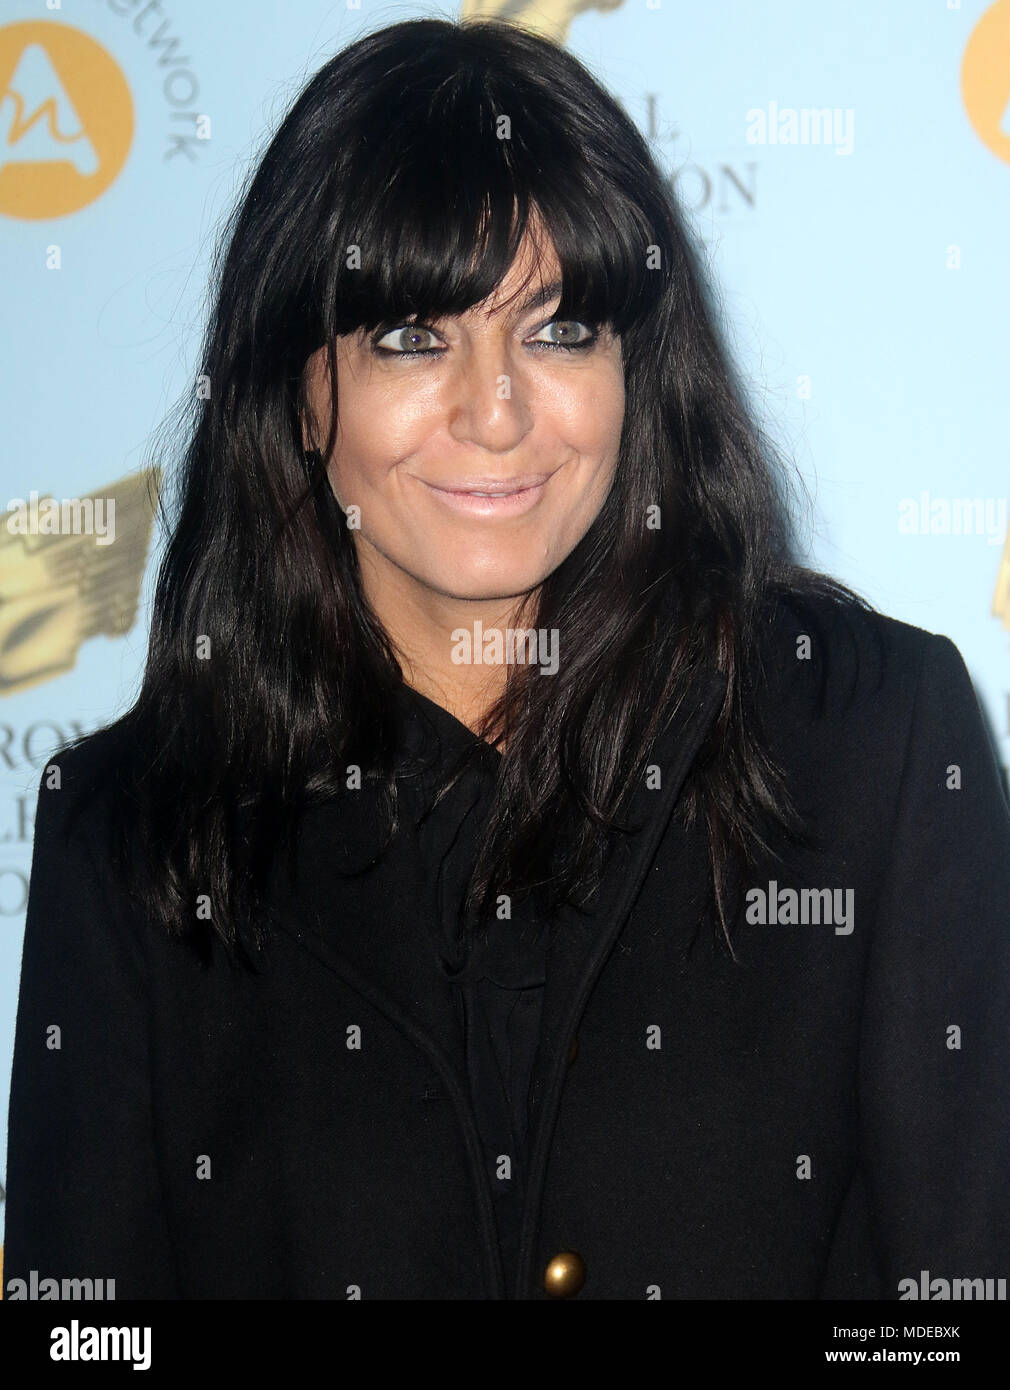 London Uk Claudia Winkleman House High Resolution Stock Photography and ...